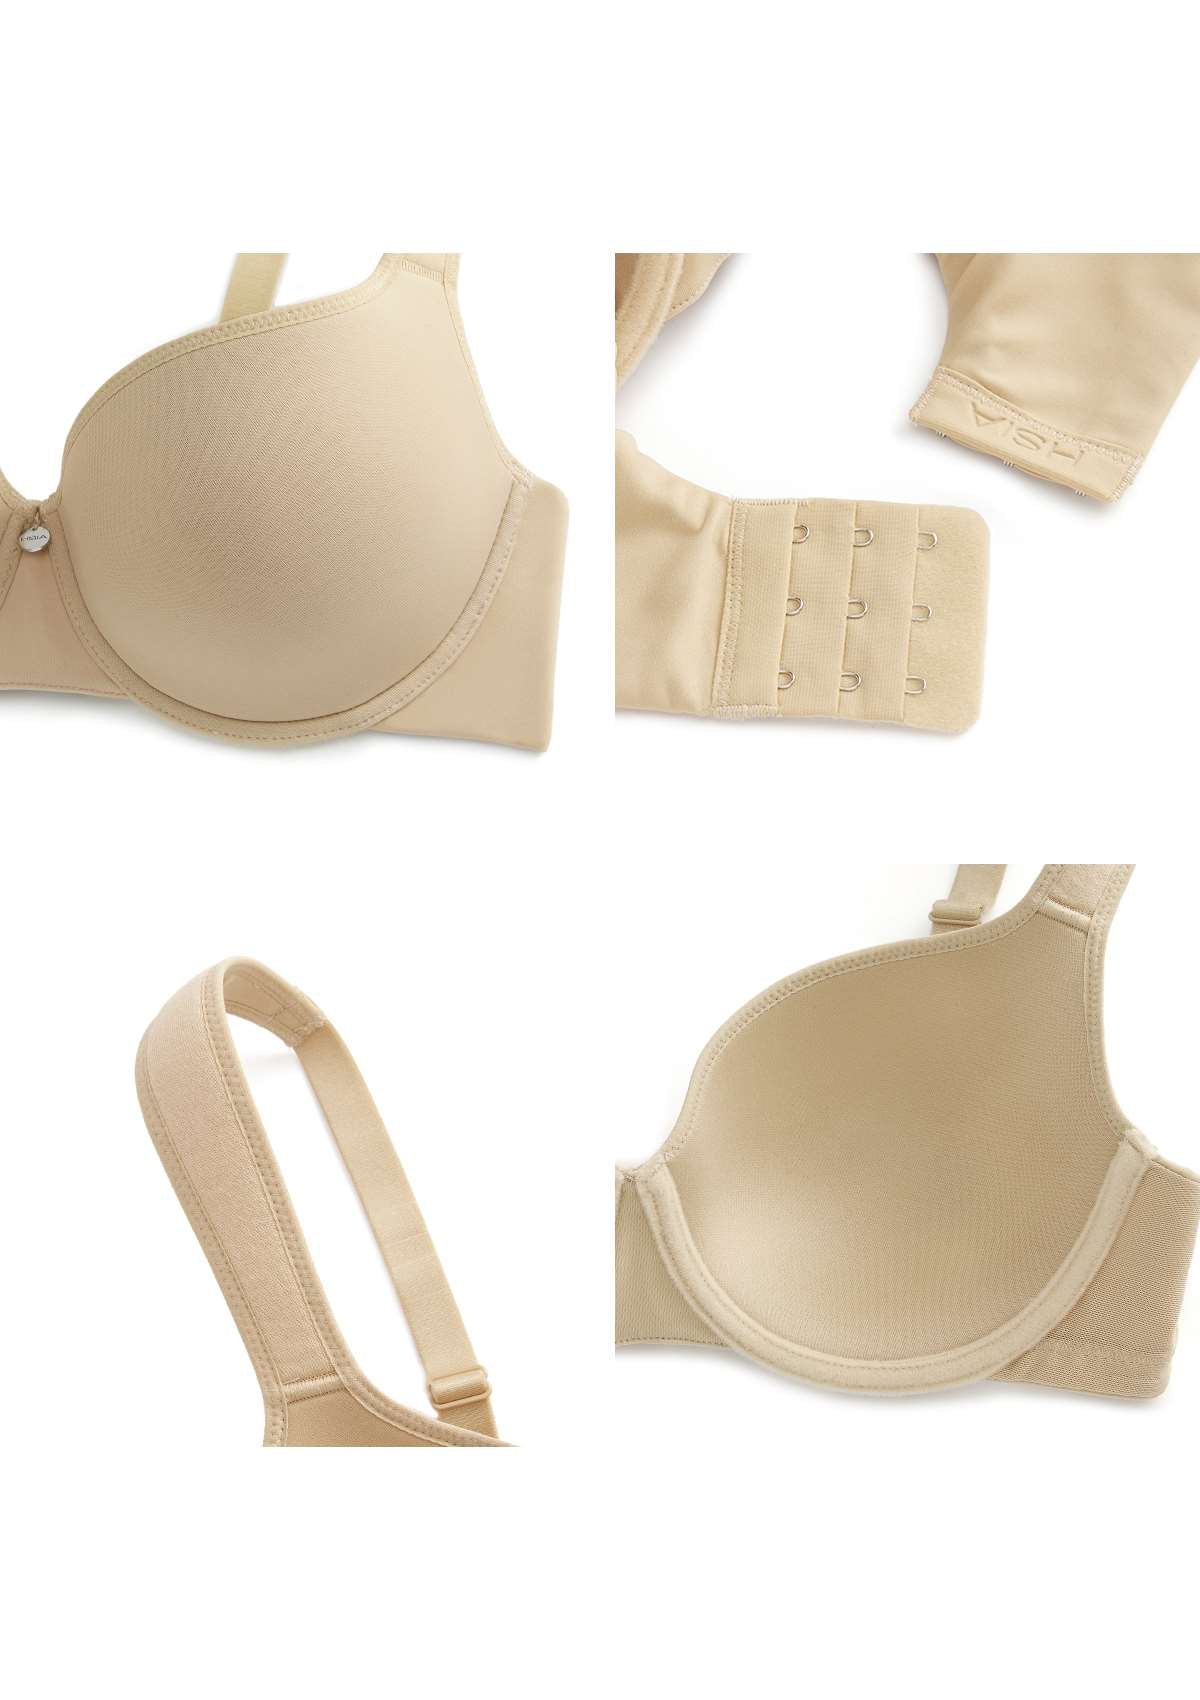 HSIA Patricia Seamless Lightly Padded Minimizer Bra -for Bigger Busts - Beige / 34 / DD/E